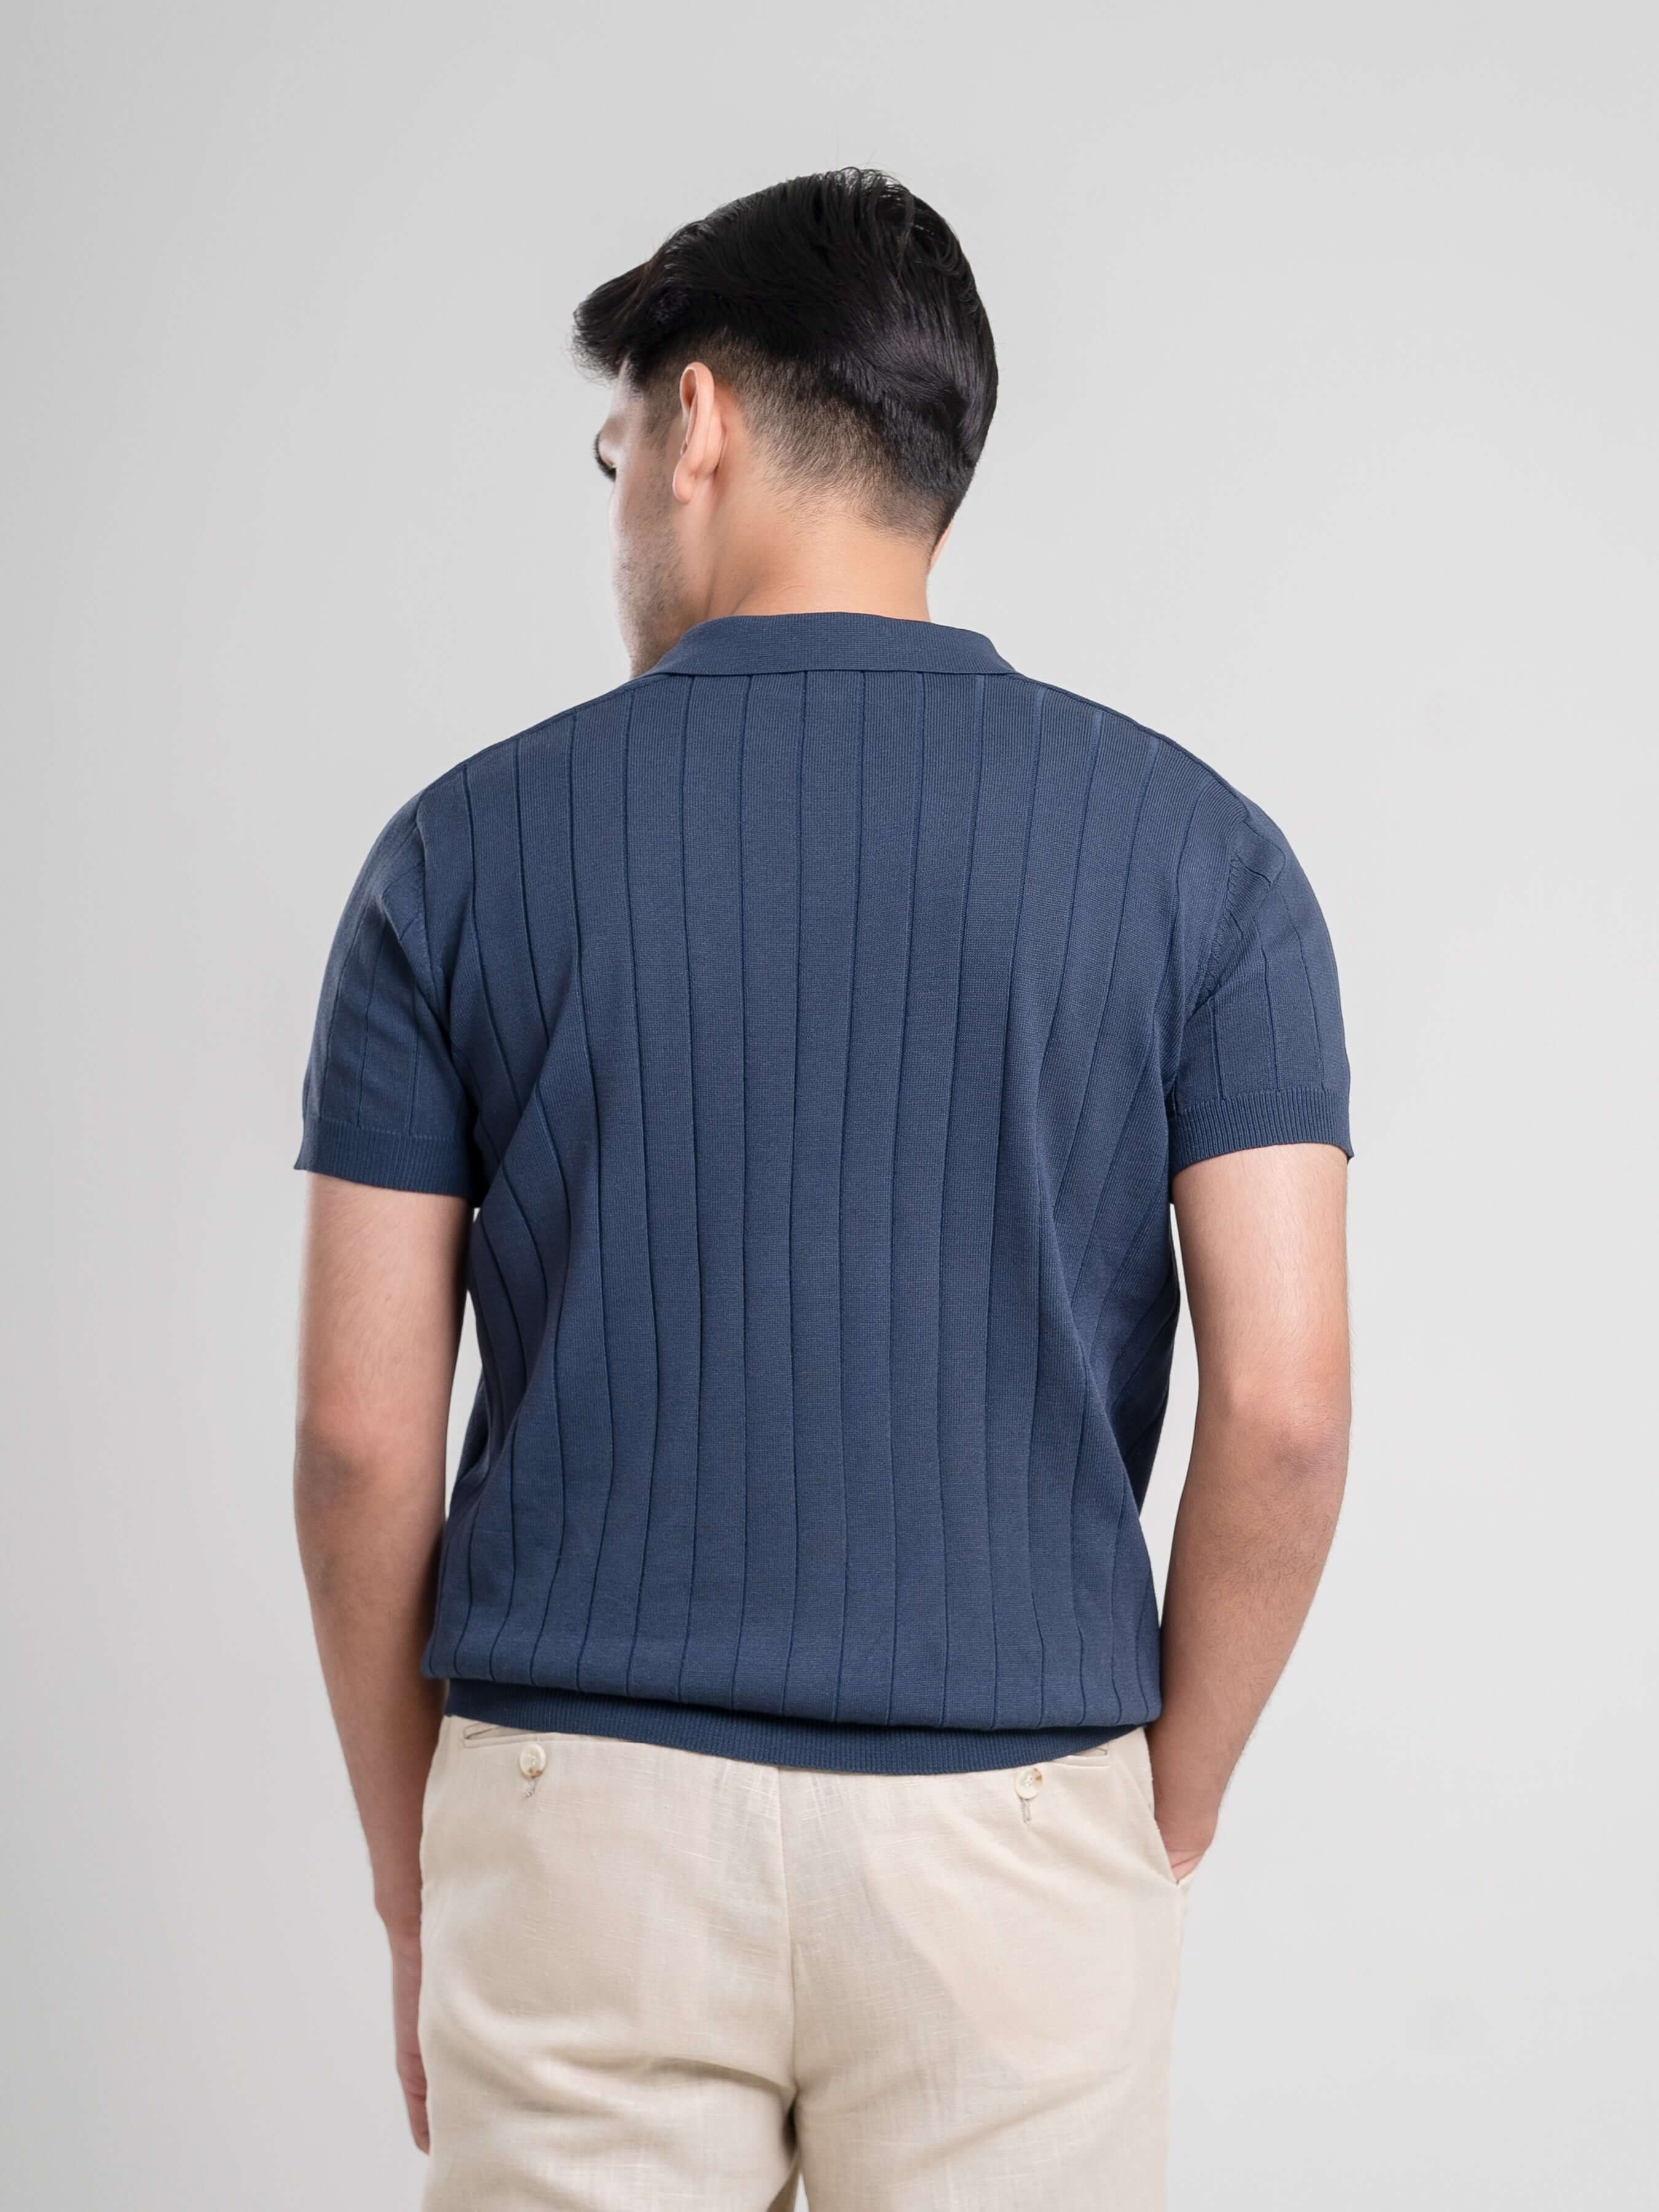 Dylan Knit Tee - Navy Blue